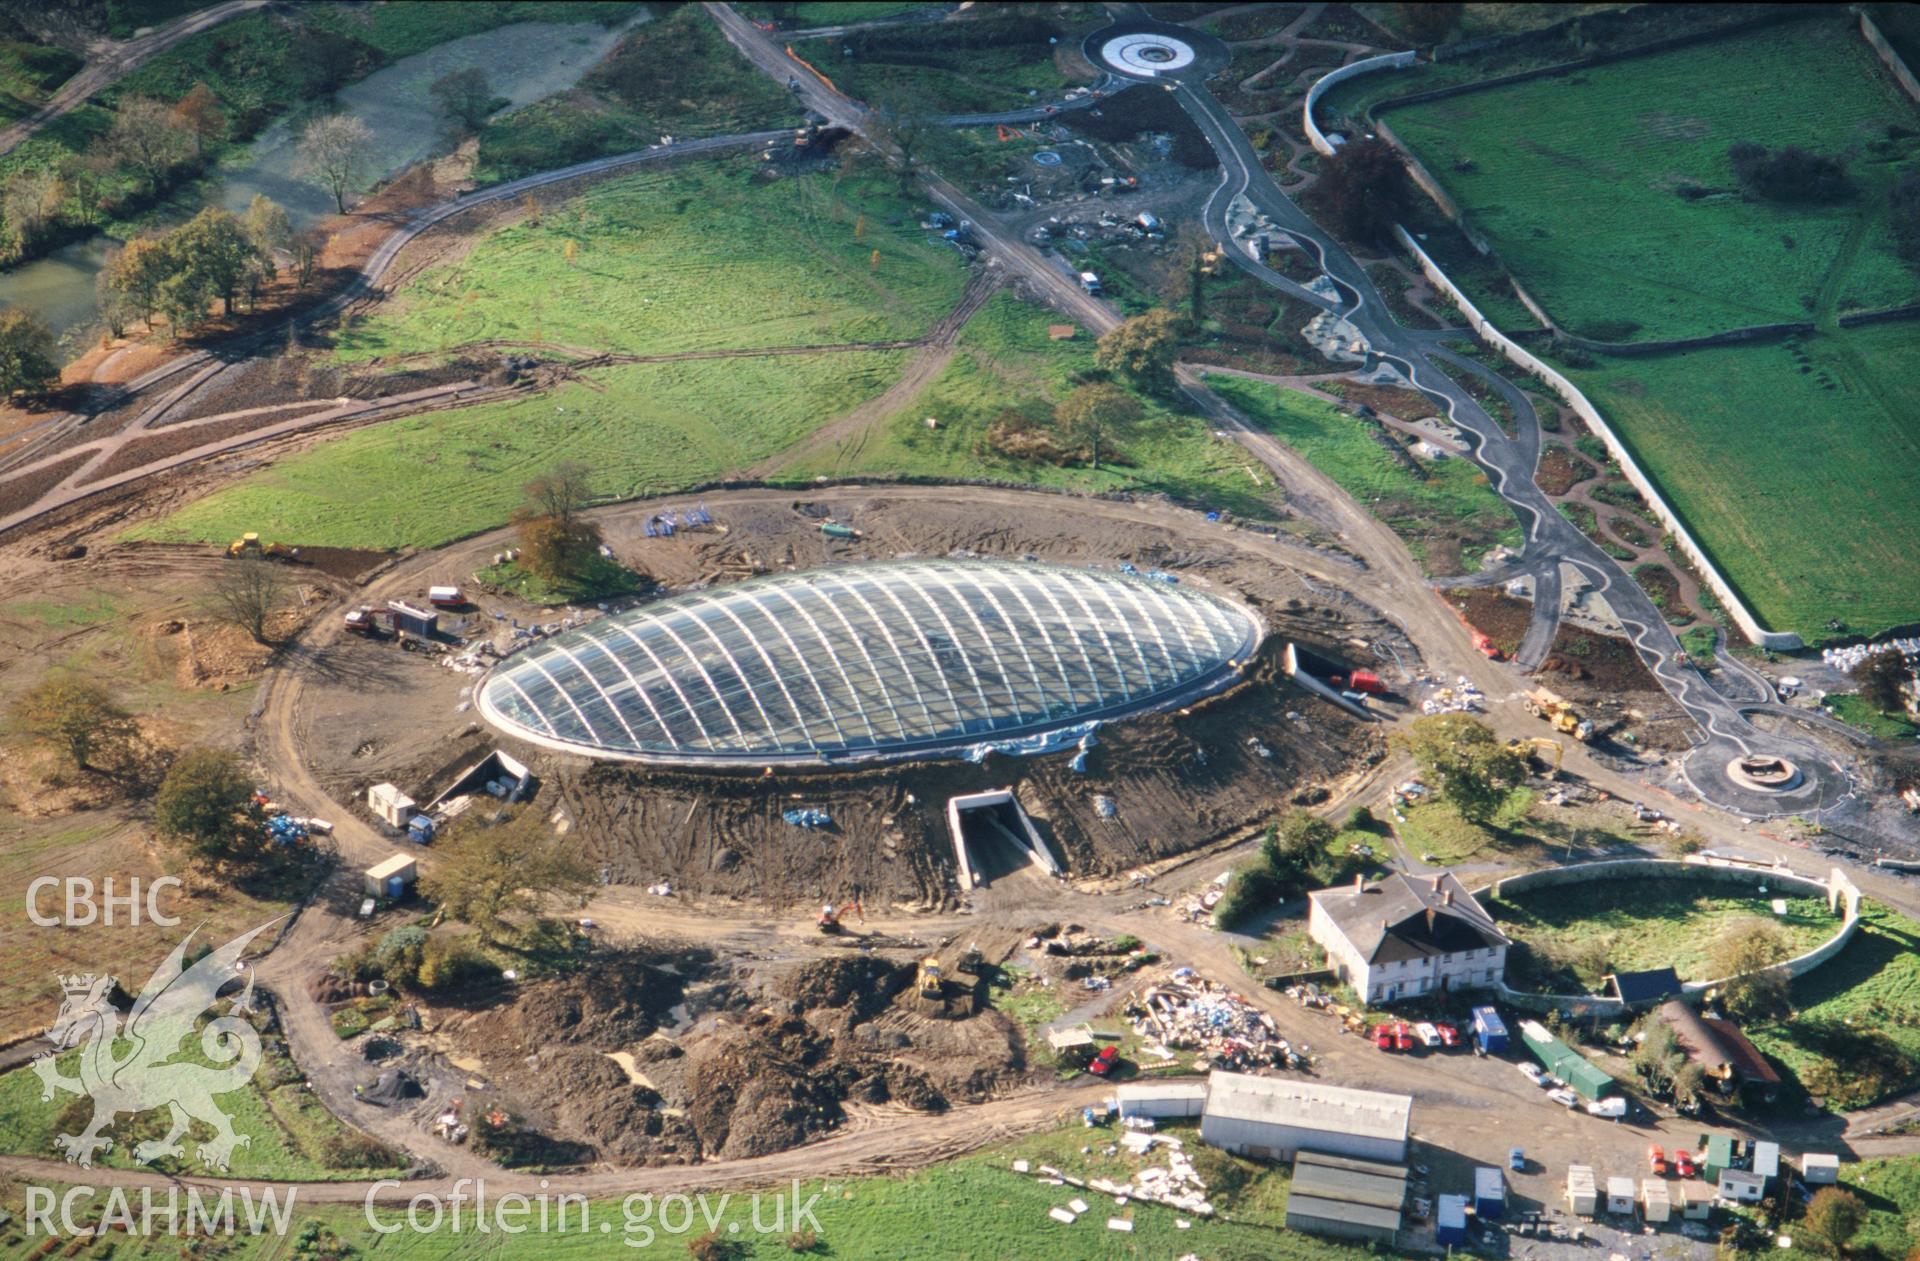 RCAHMW colour slide oblique aerial photograph of the Glasshouse at the National Botanic Gardens, Llanarthney, taken on 30/10/1998 by Toby Driver